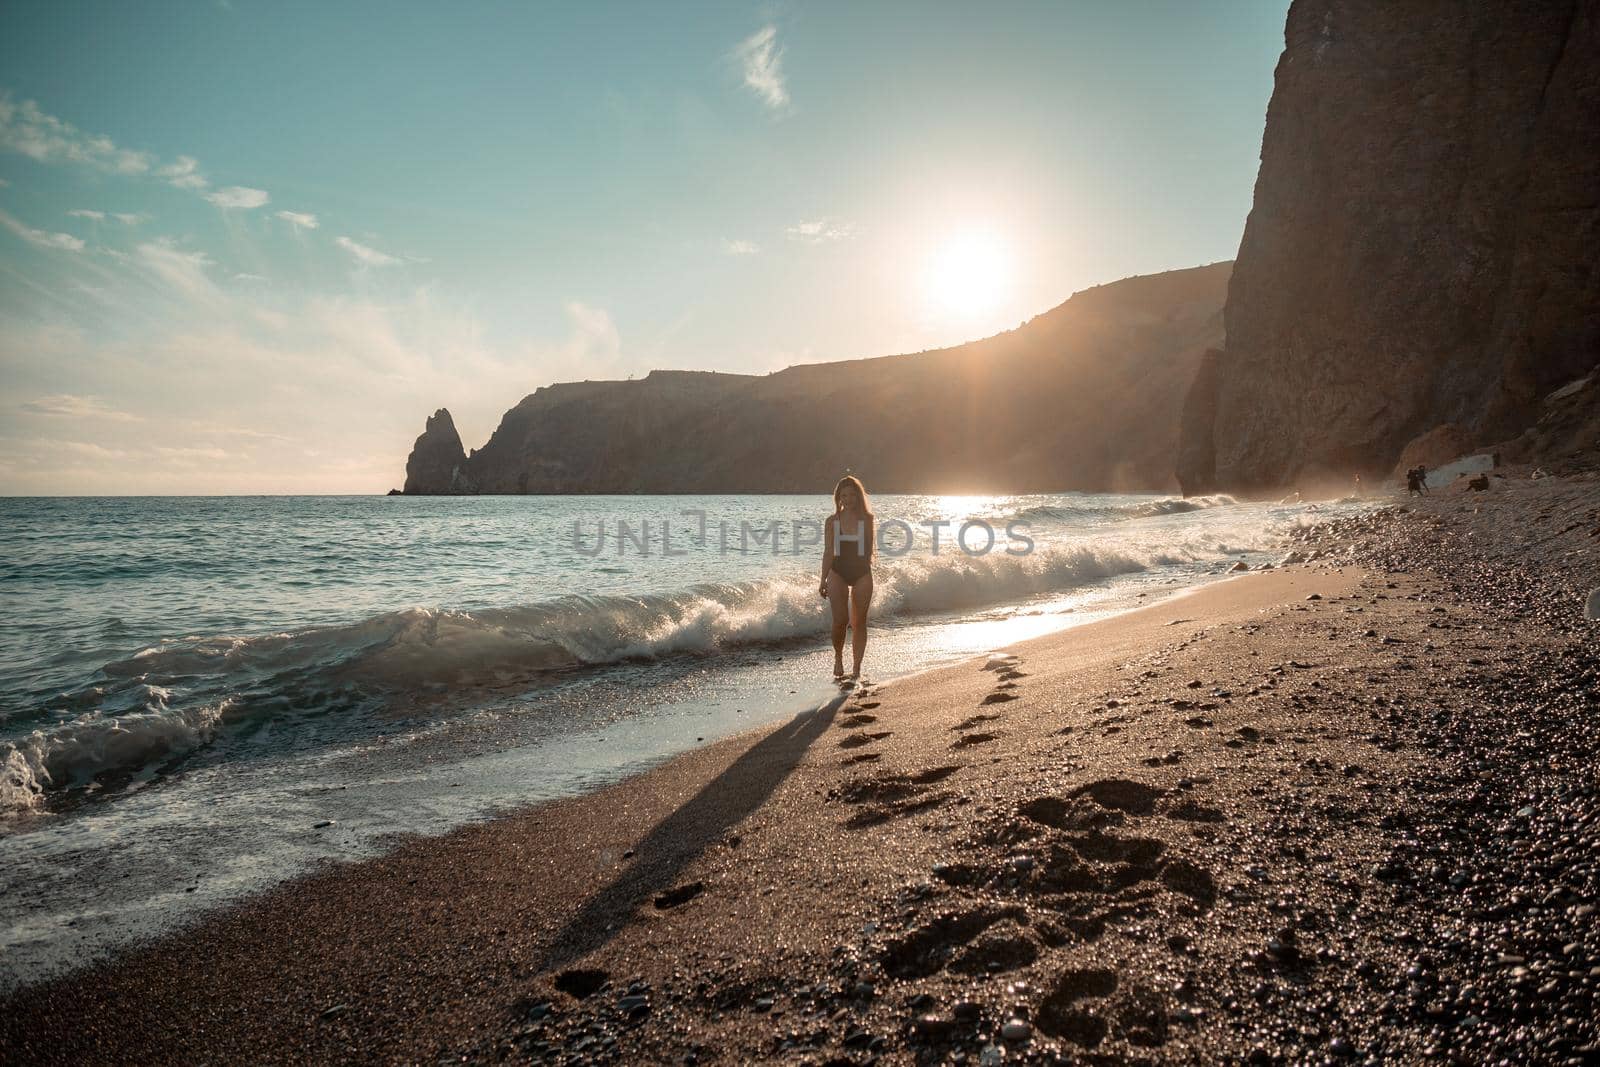 Selective focus. Happy carefree sensual woman with long hair in black swimwear posing at sunset beach. Silhouette of young beautiful playful positive woman outdoor. Summer vacation and trip concept.